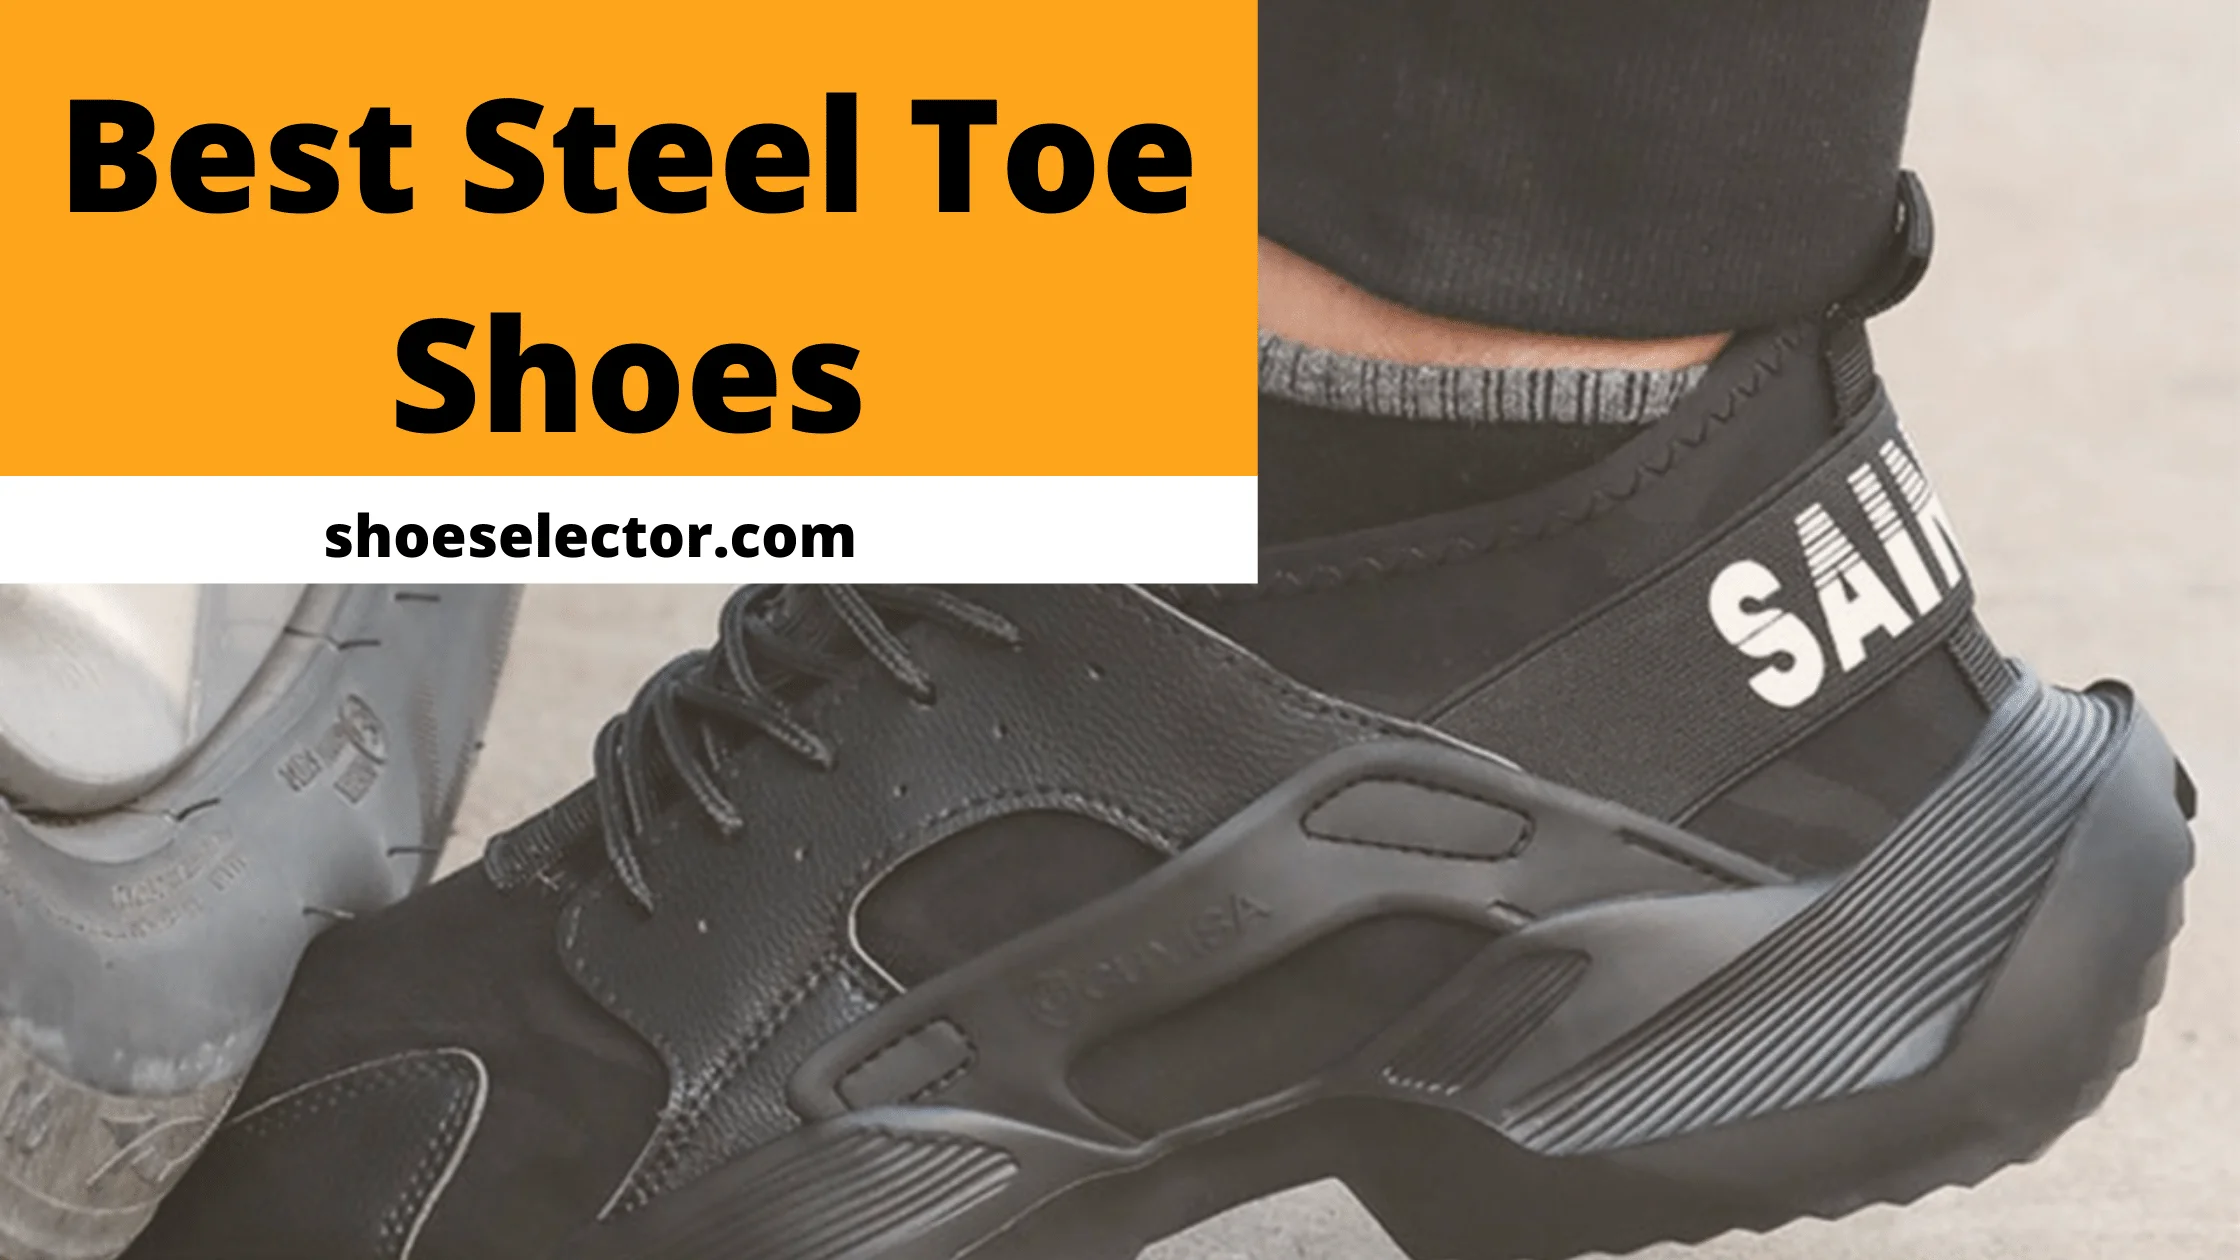 Best Steel Toe Shoes With Buying Guides